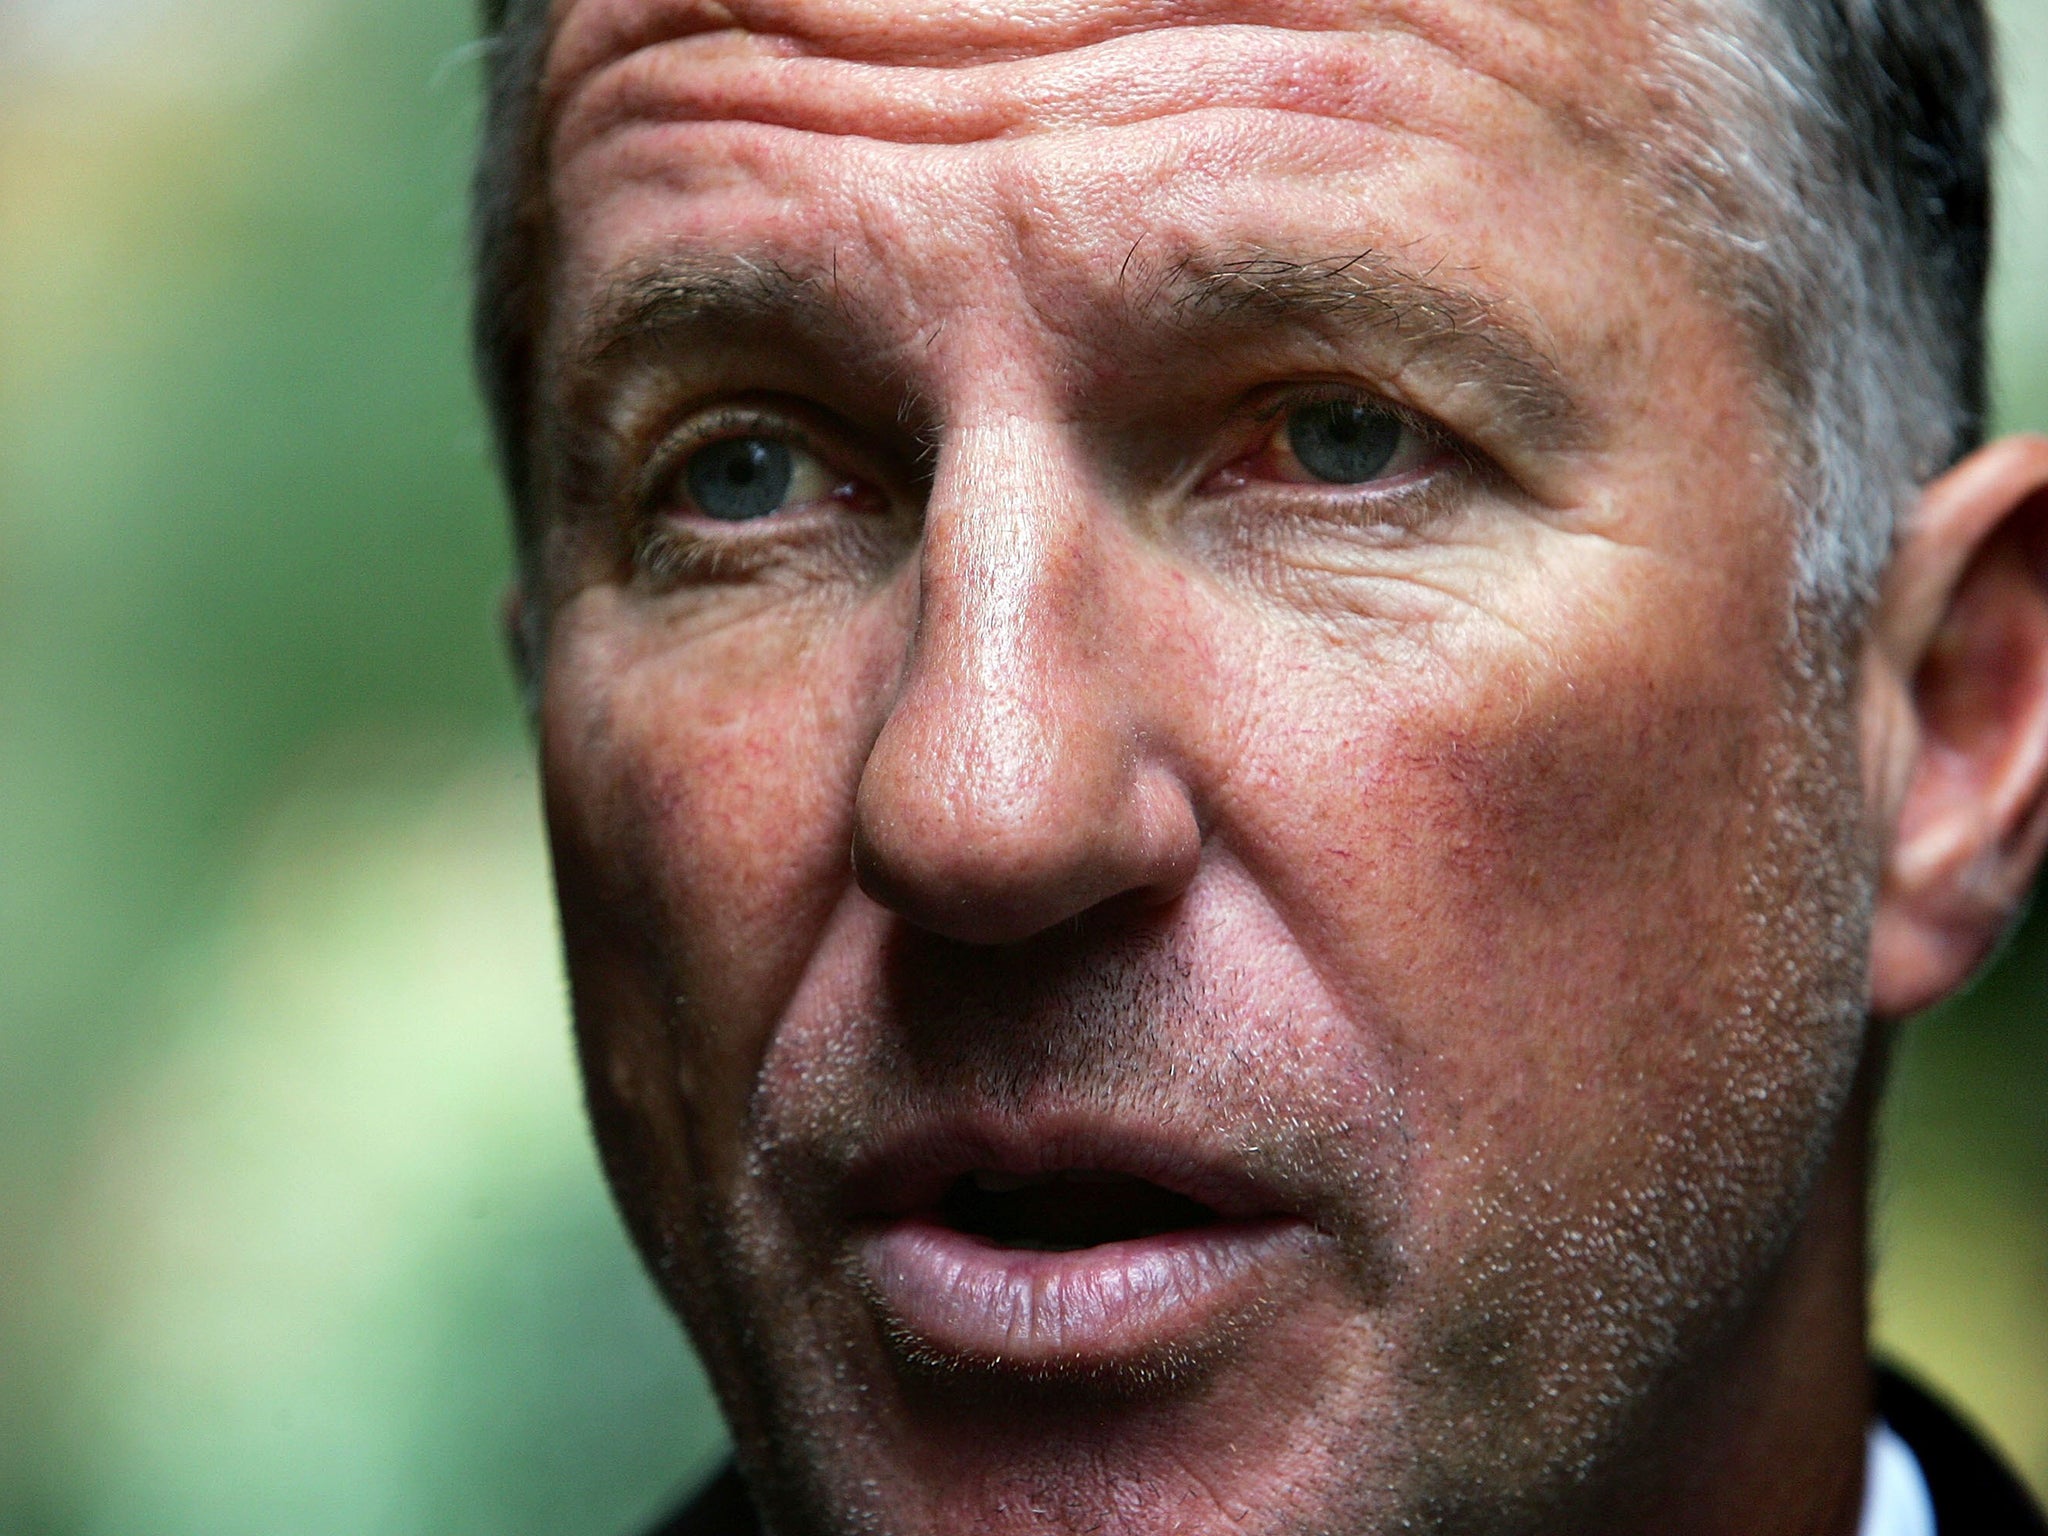 Former England cricket captain Sir Ian Botham is part of a campaign group that has criticised the RSPB